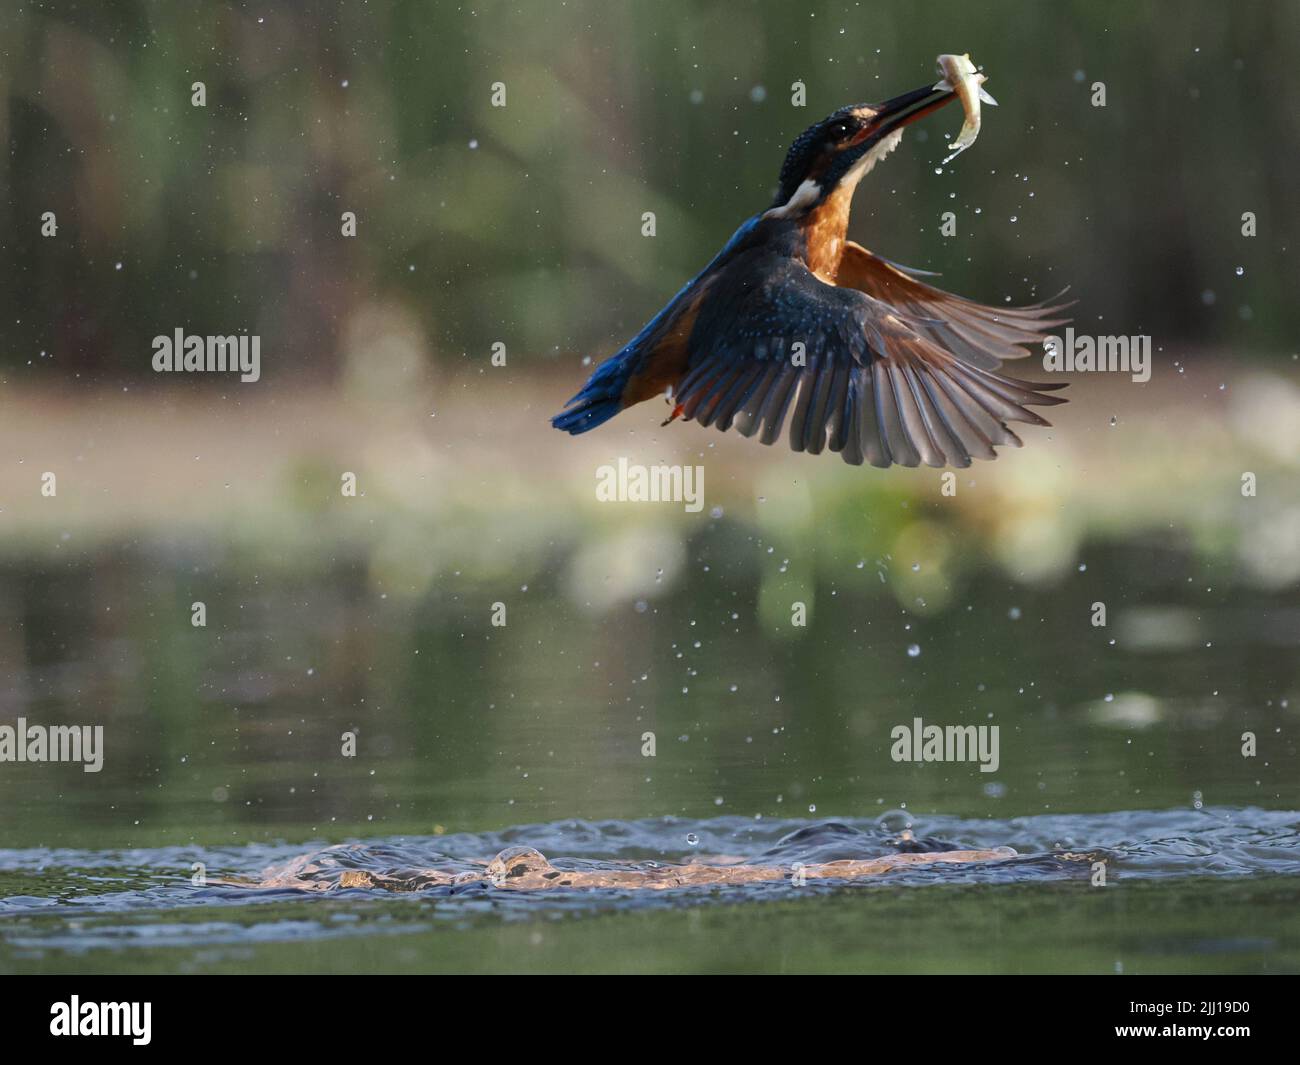 Flapping its wings, the kingfisher leaves happy. UK: THESE BEAUTIFUL images mark a momentous occasion for this blind photographer as he finally achiev Stock Photo